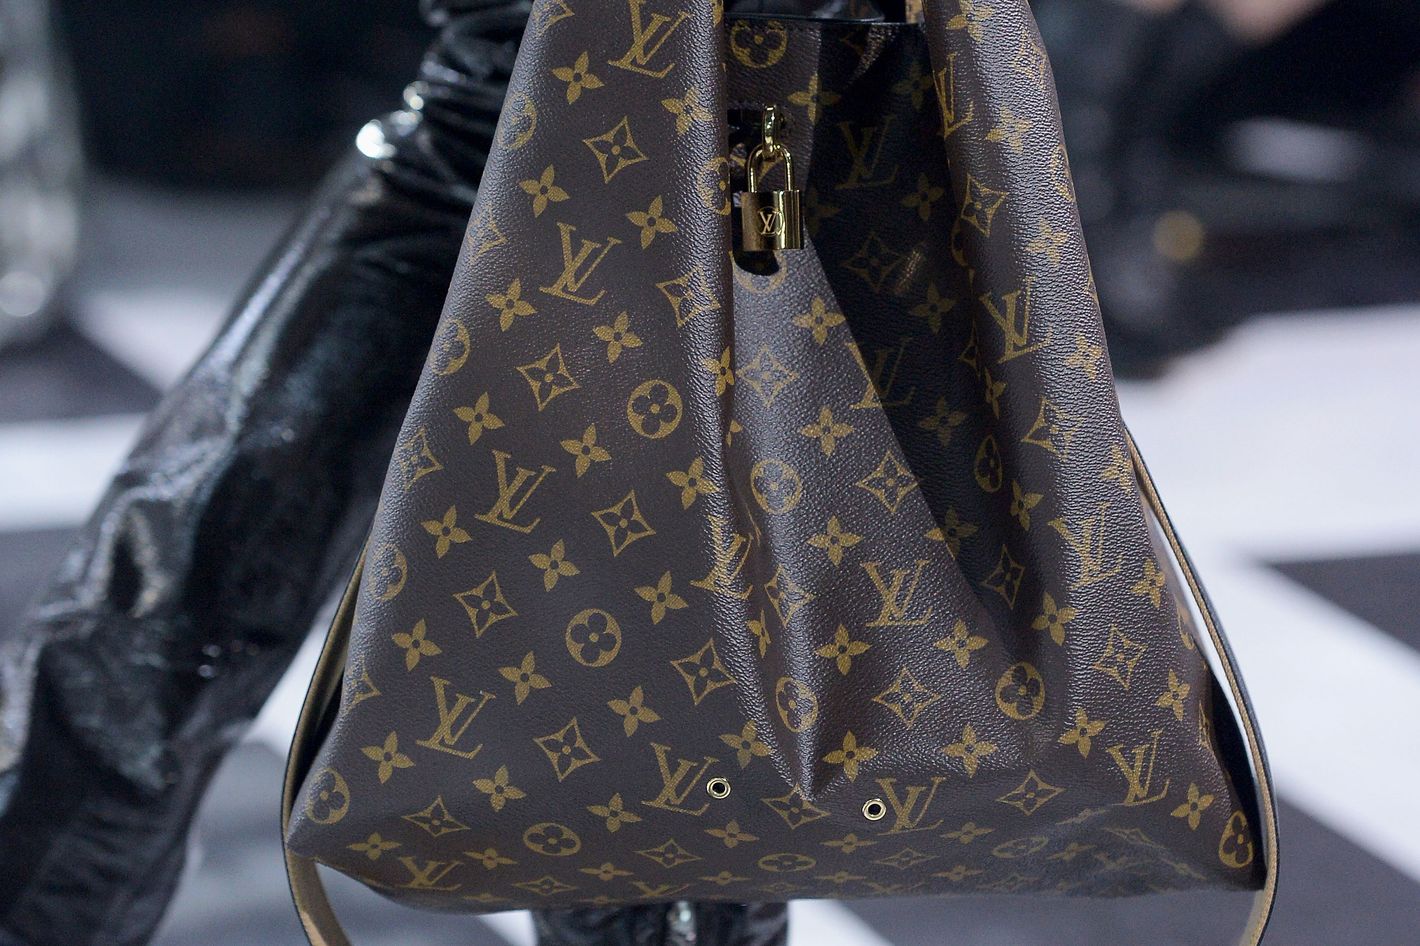 Everything You Need to Know About the Louis Vuitton Show